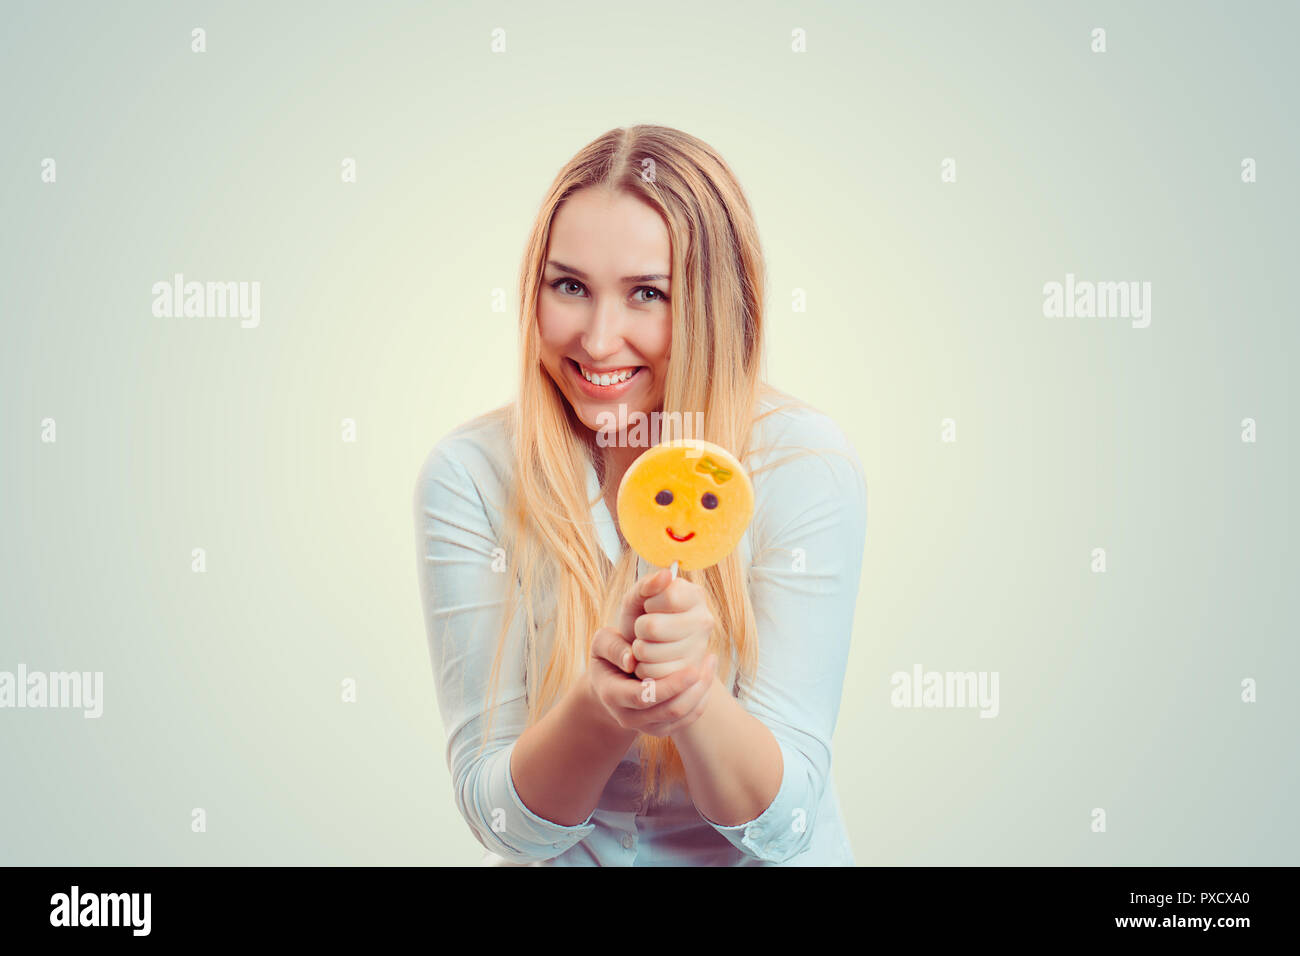 Bright blond woman holding stick with emoji lollipop smiling at camera Stock Photo